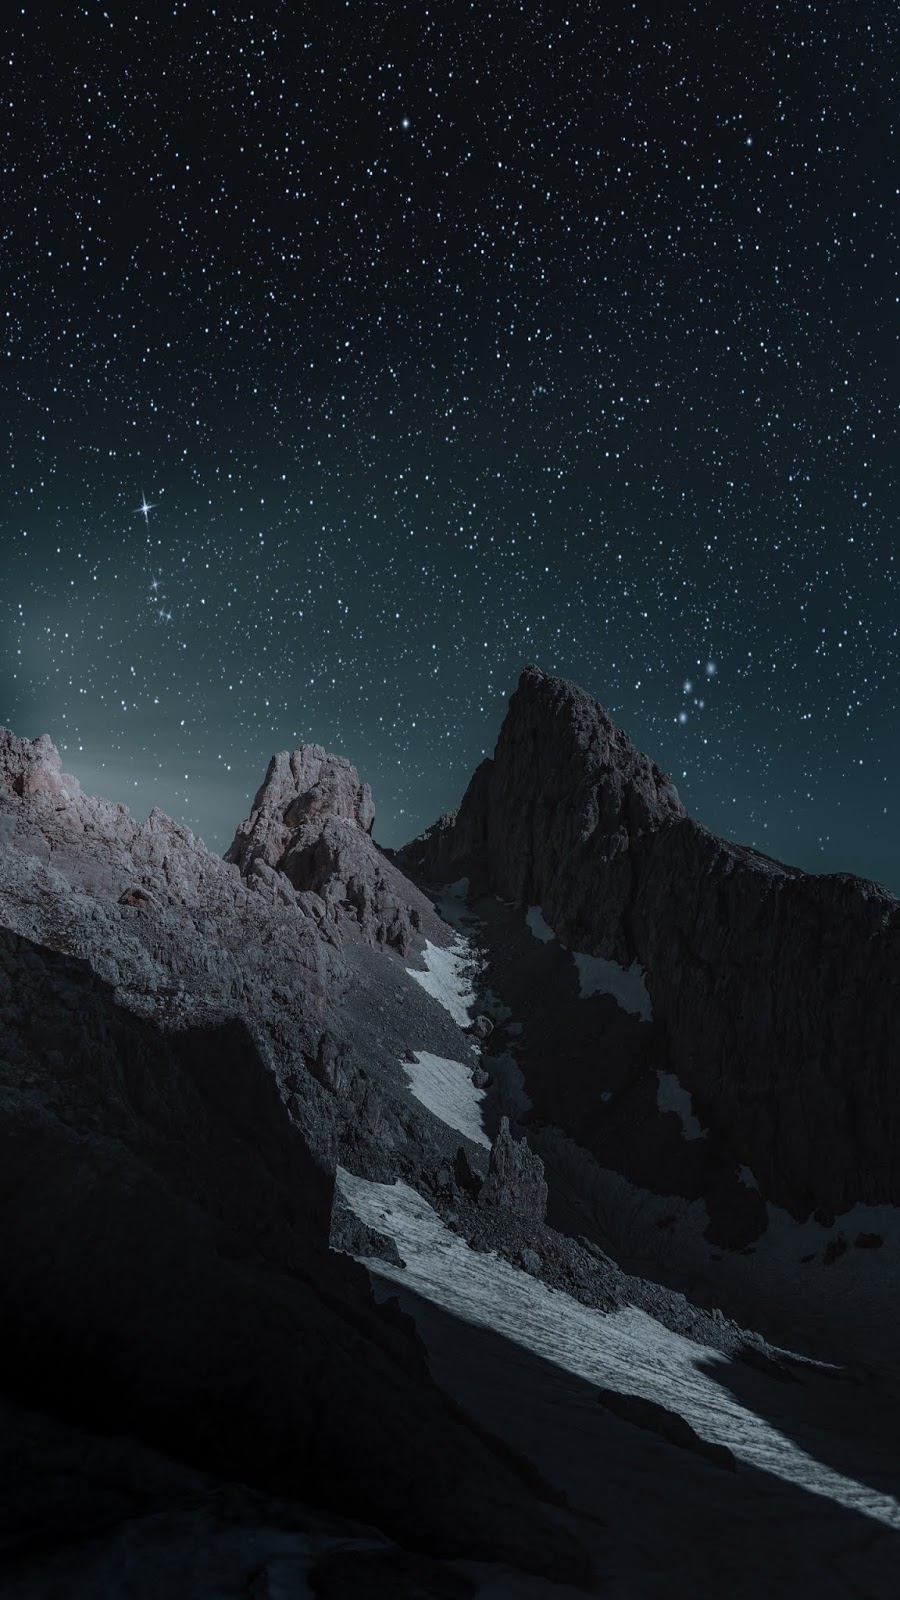 Starry night over mountains